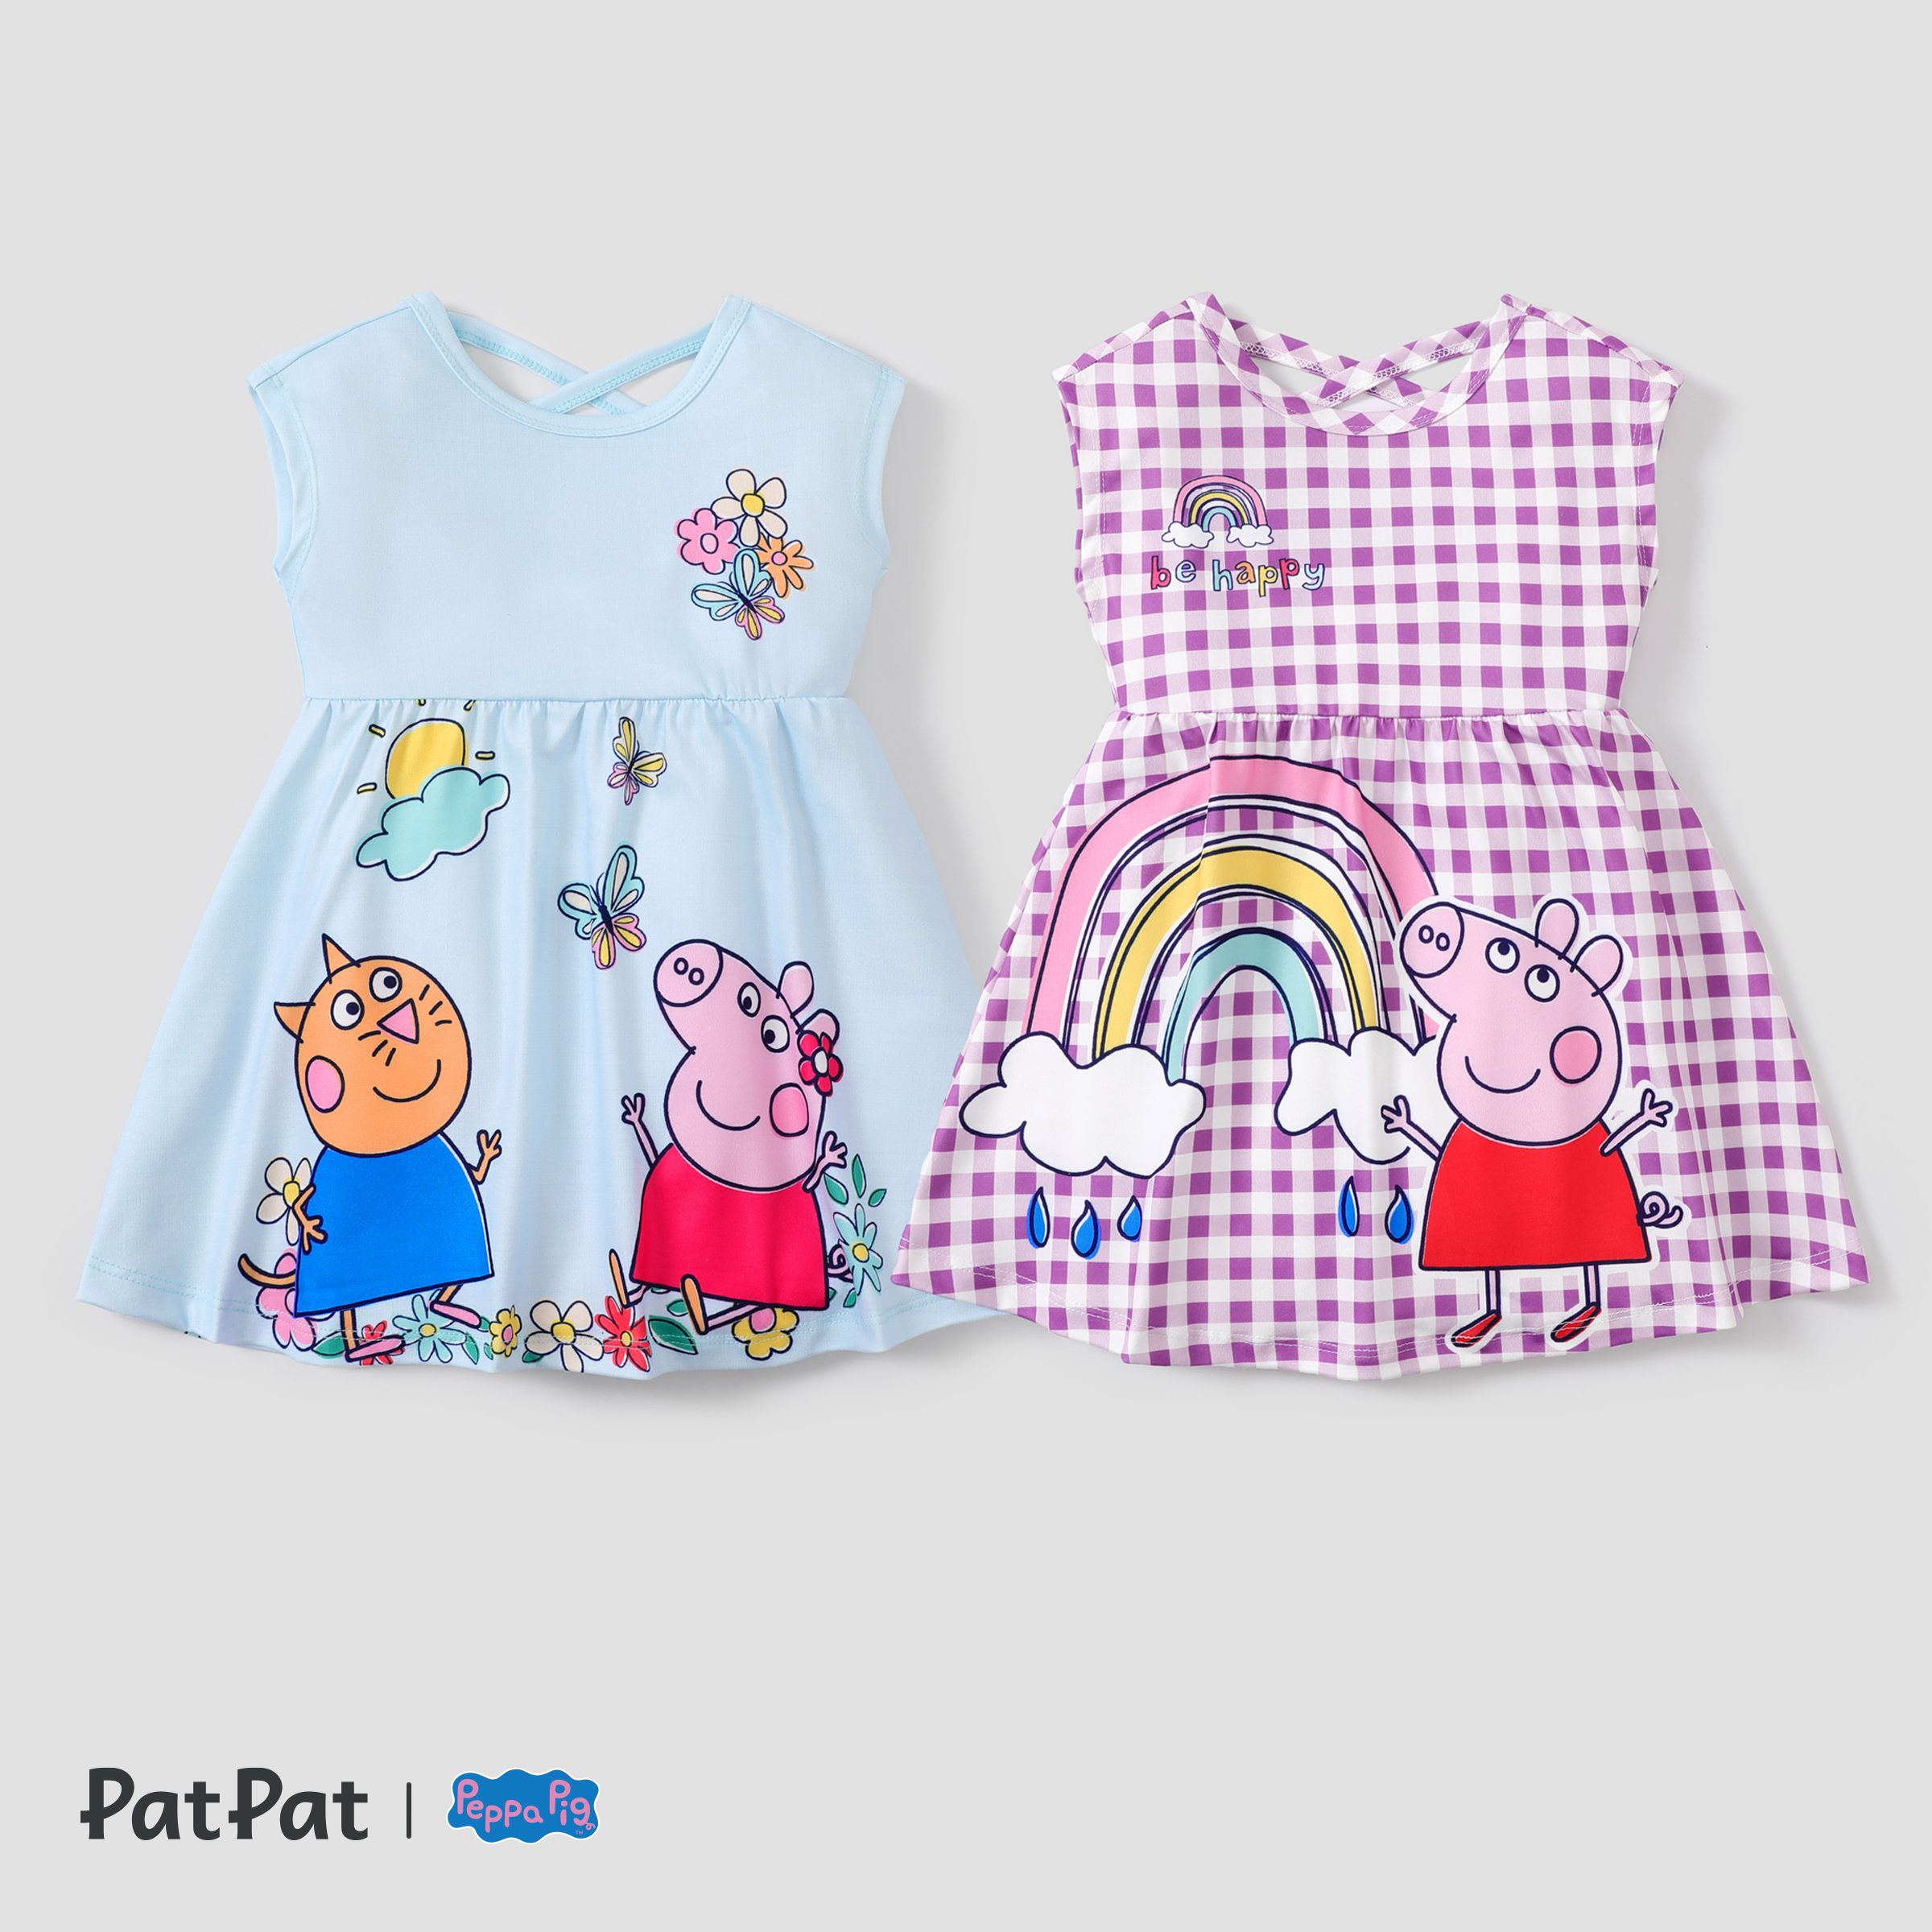 PEPPA PIG COSTUME | Party Stop